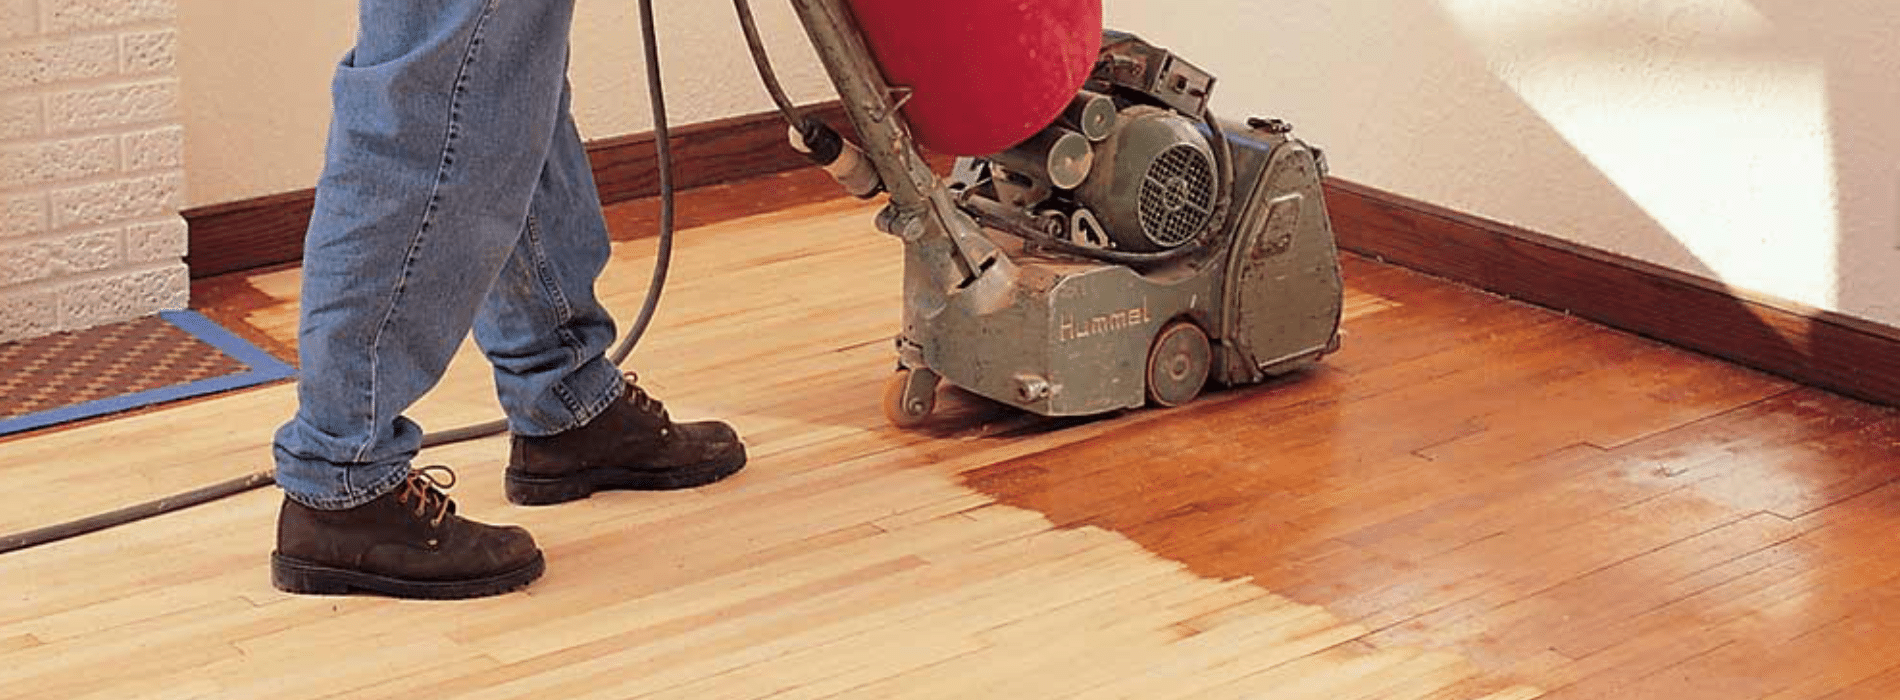 Mr Sander® are using a Bona Scorpion drum sander, measuring 200 mm, with a power output of 1.5 kW. It operates at 240 V and 50 Hz frequency in Hounslow, TW3. A dust extraction system with a HEPA filter ensures a clean and efficient sanding process for the herringbone floor. 